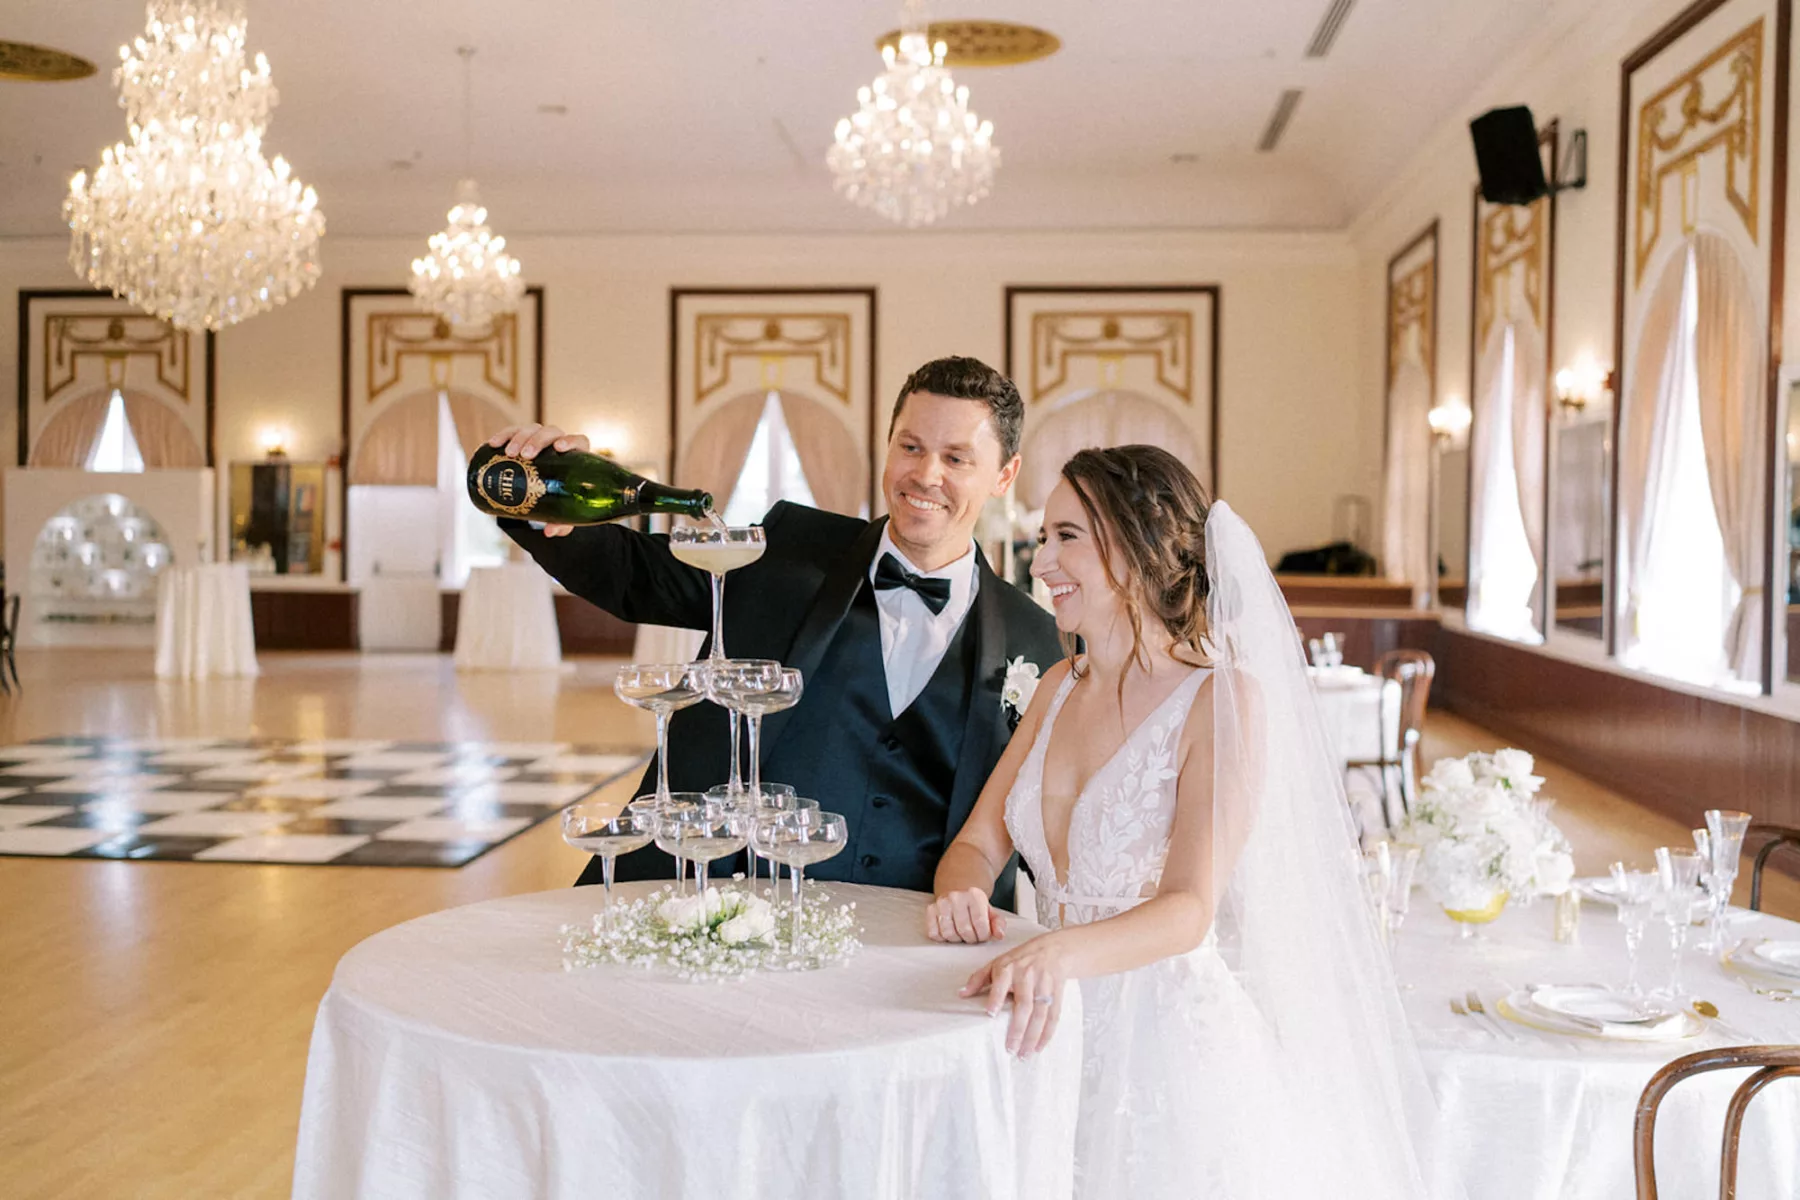 Bride and Groom Champagne Tower Inspiration for Classic White Wedding Reception Inspiration | Historic Ybor Venue Centro Asturiano | Photographer Eddy Almaguer Photography